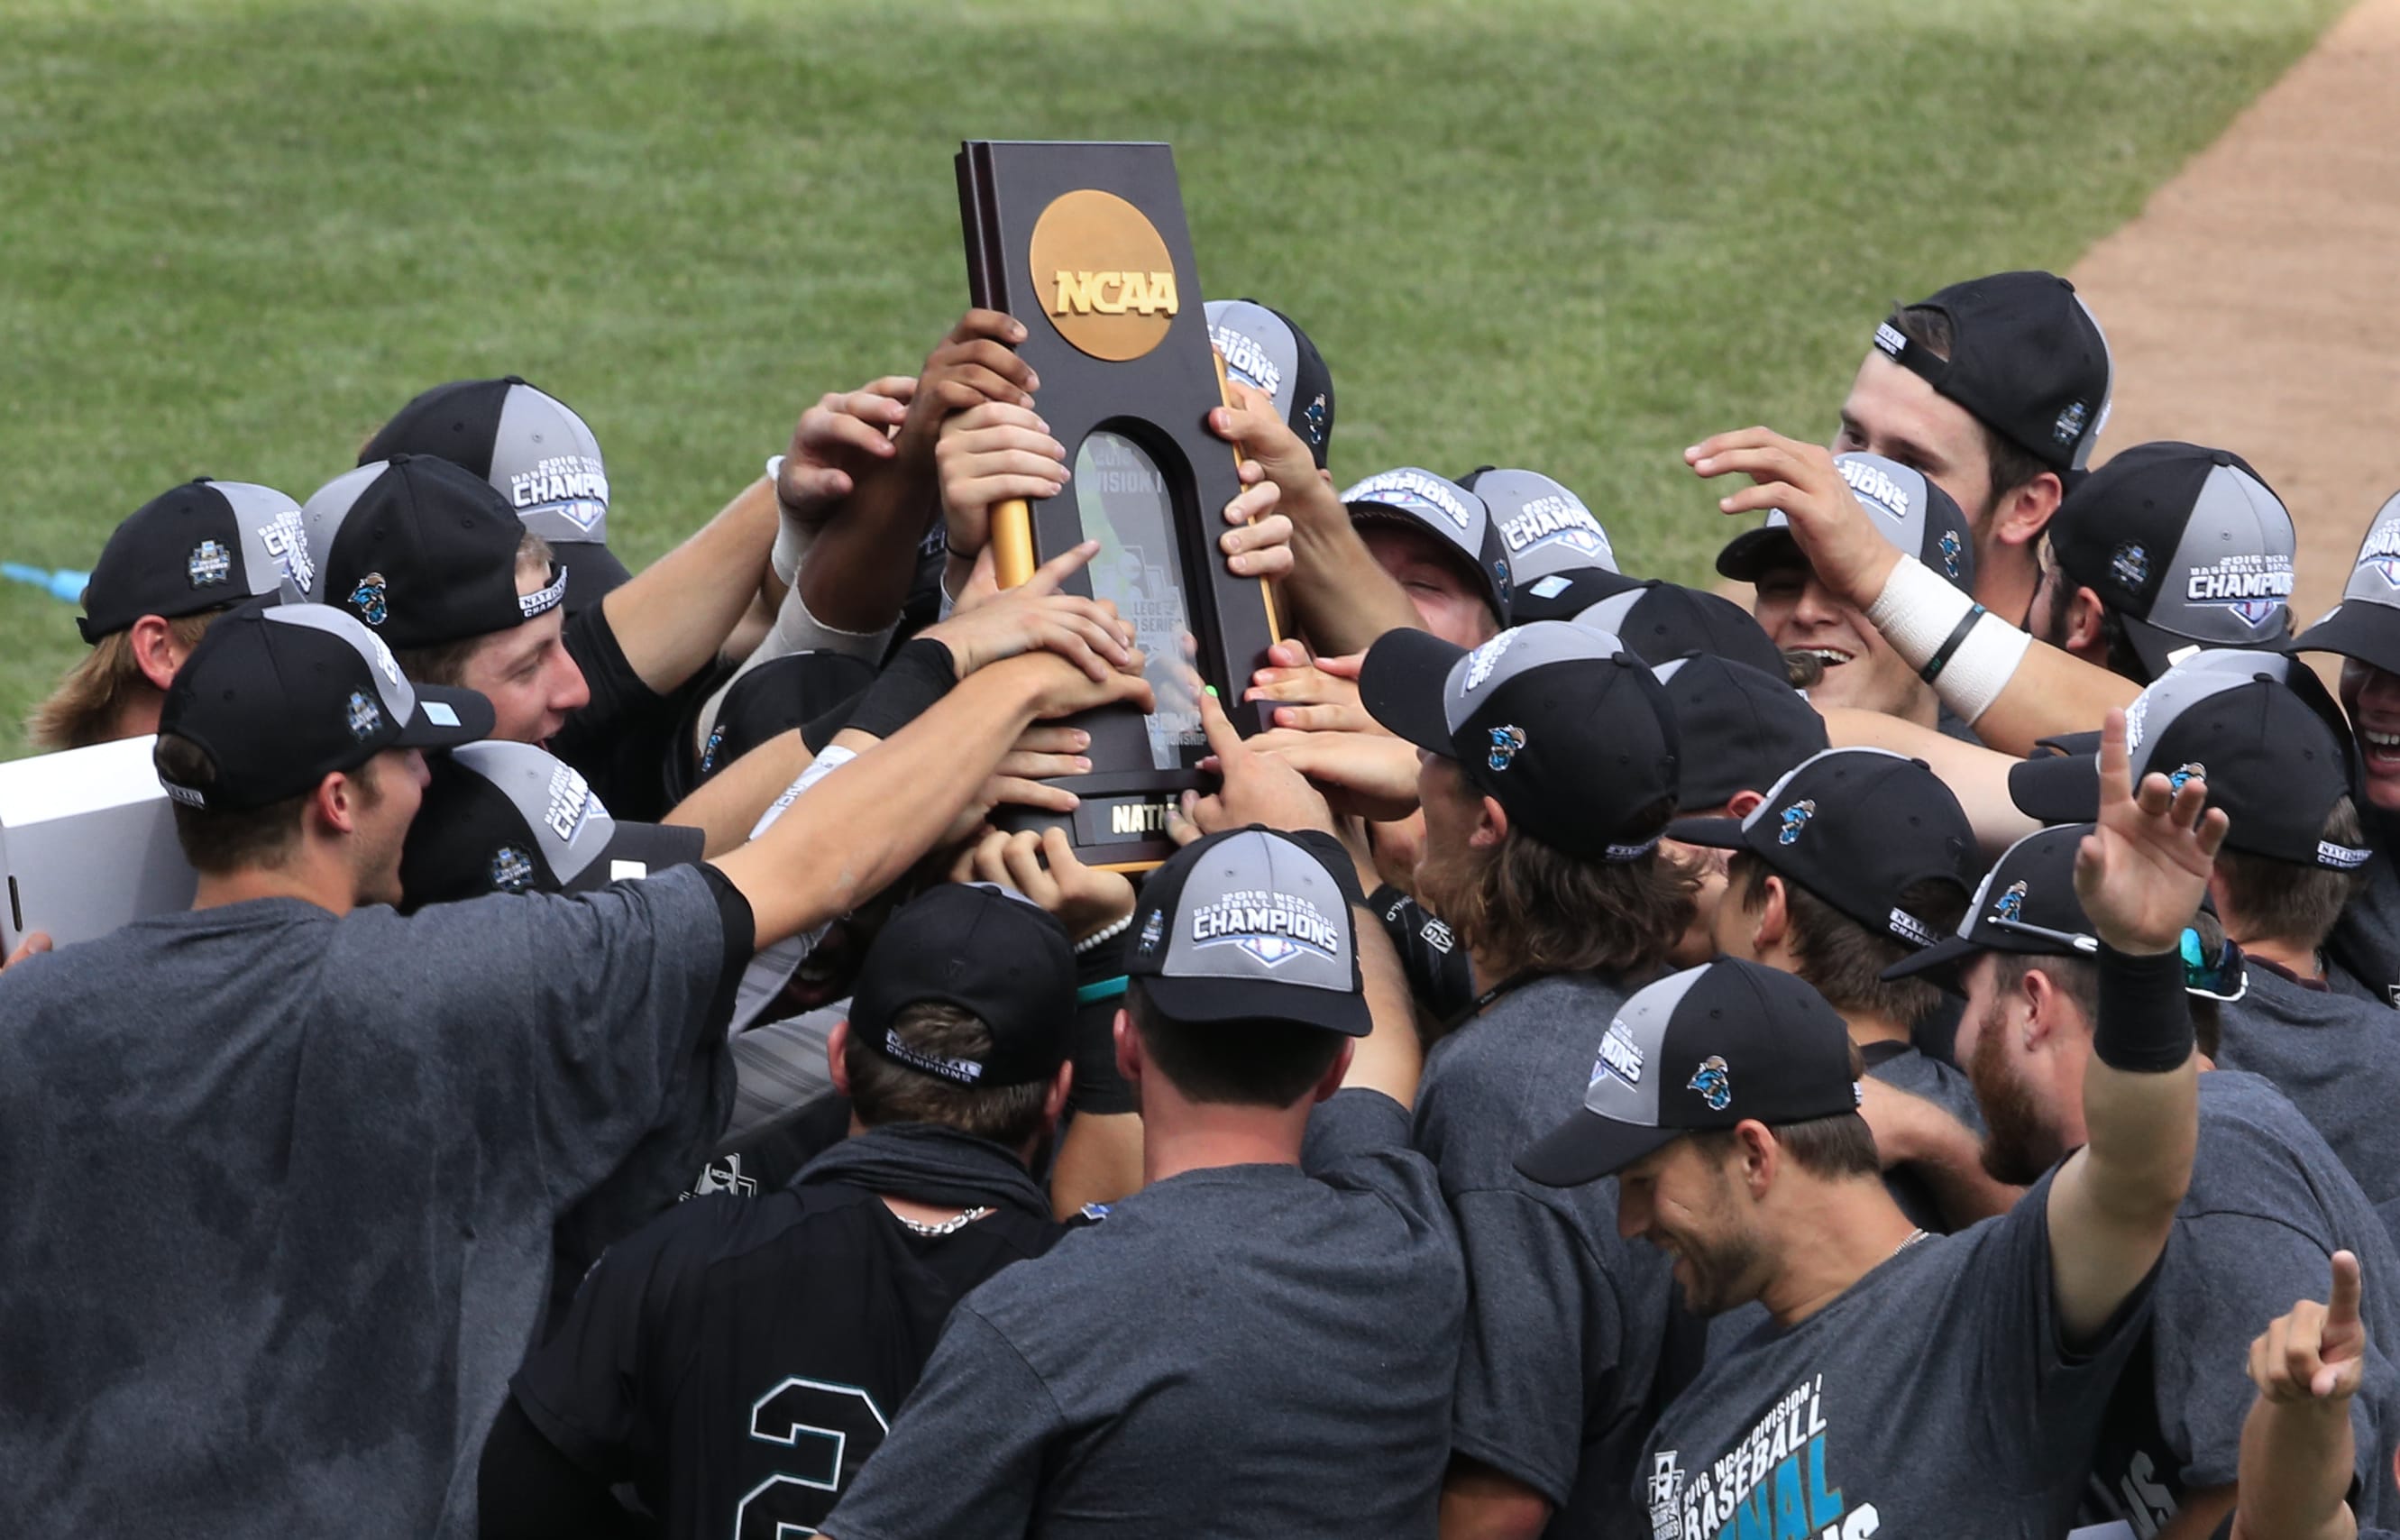 Coastal Carolina players celebrate their 4-3 victory over Arizona to win the championship after Game 3 of the NCAA College World Series baseball finals in Omaha, Neb., Thursday, June 30, 2016.